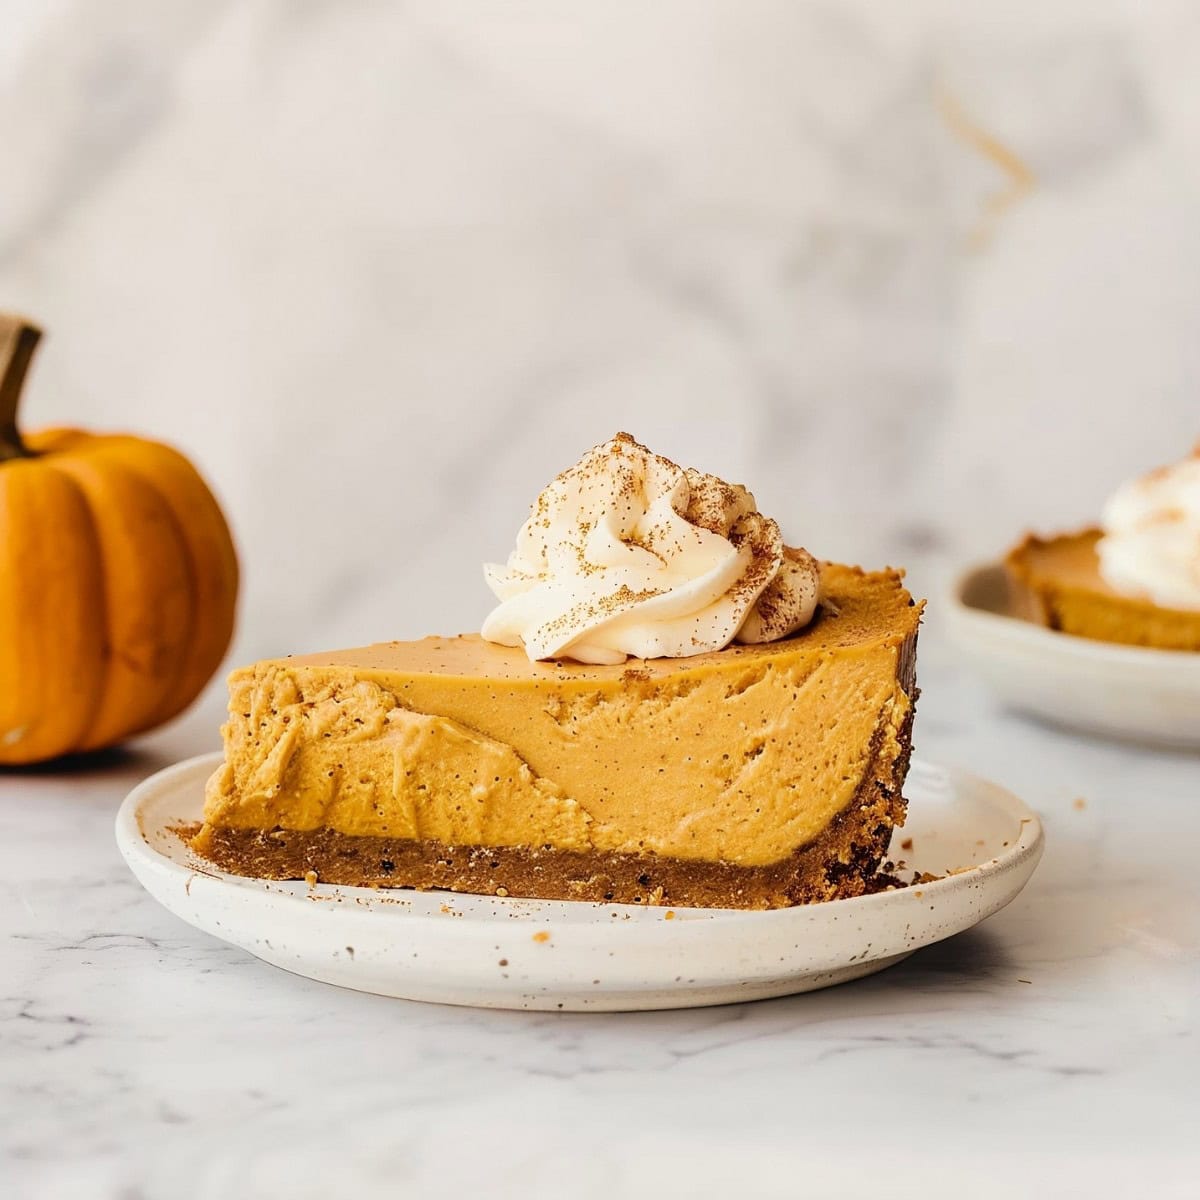 Irresistible no-bake pumpkin cheesecake, topped with a dollop of whipped cream and a sprinkle of cinnamon